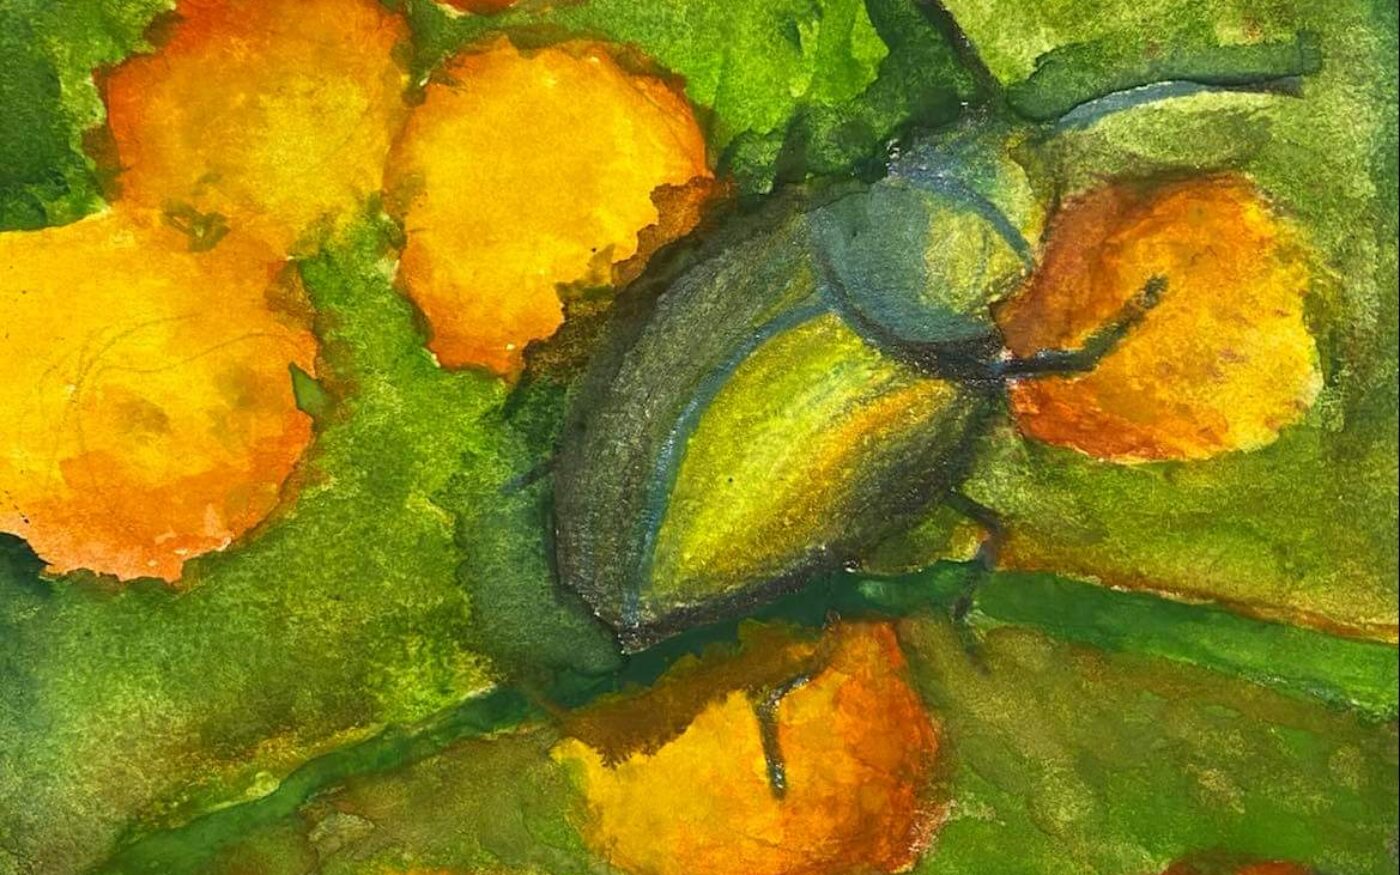 The Wonderful Tansy Beetle by Ellen Houldsworth, 3rd place in 8-12 category, Insect Week 2022 art competition